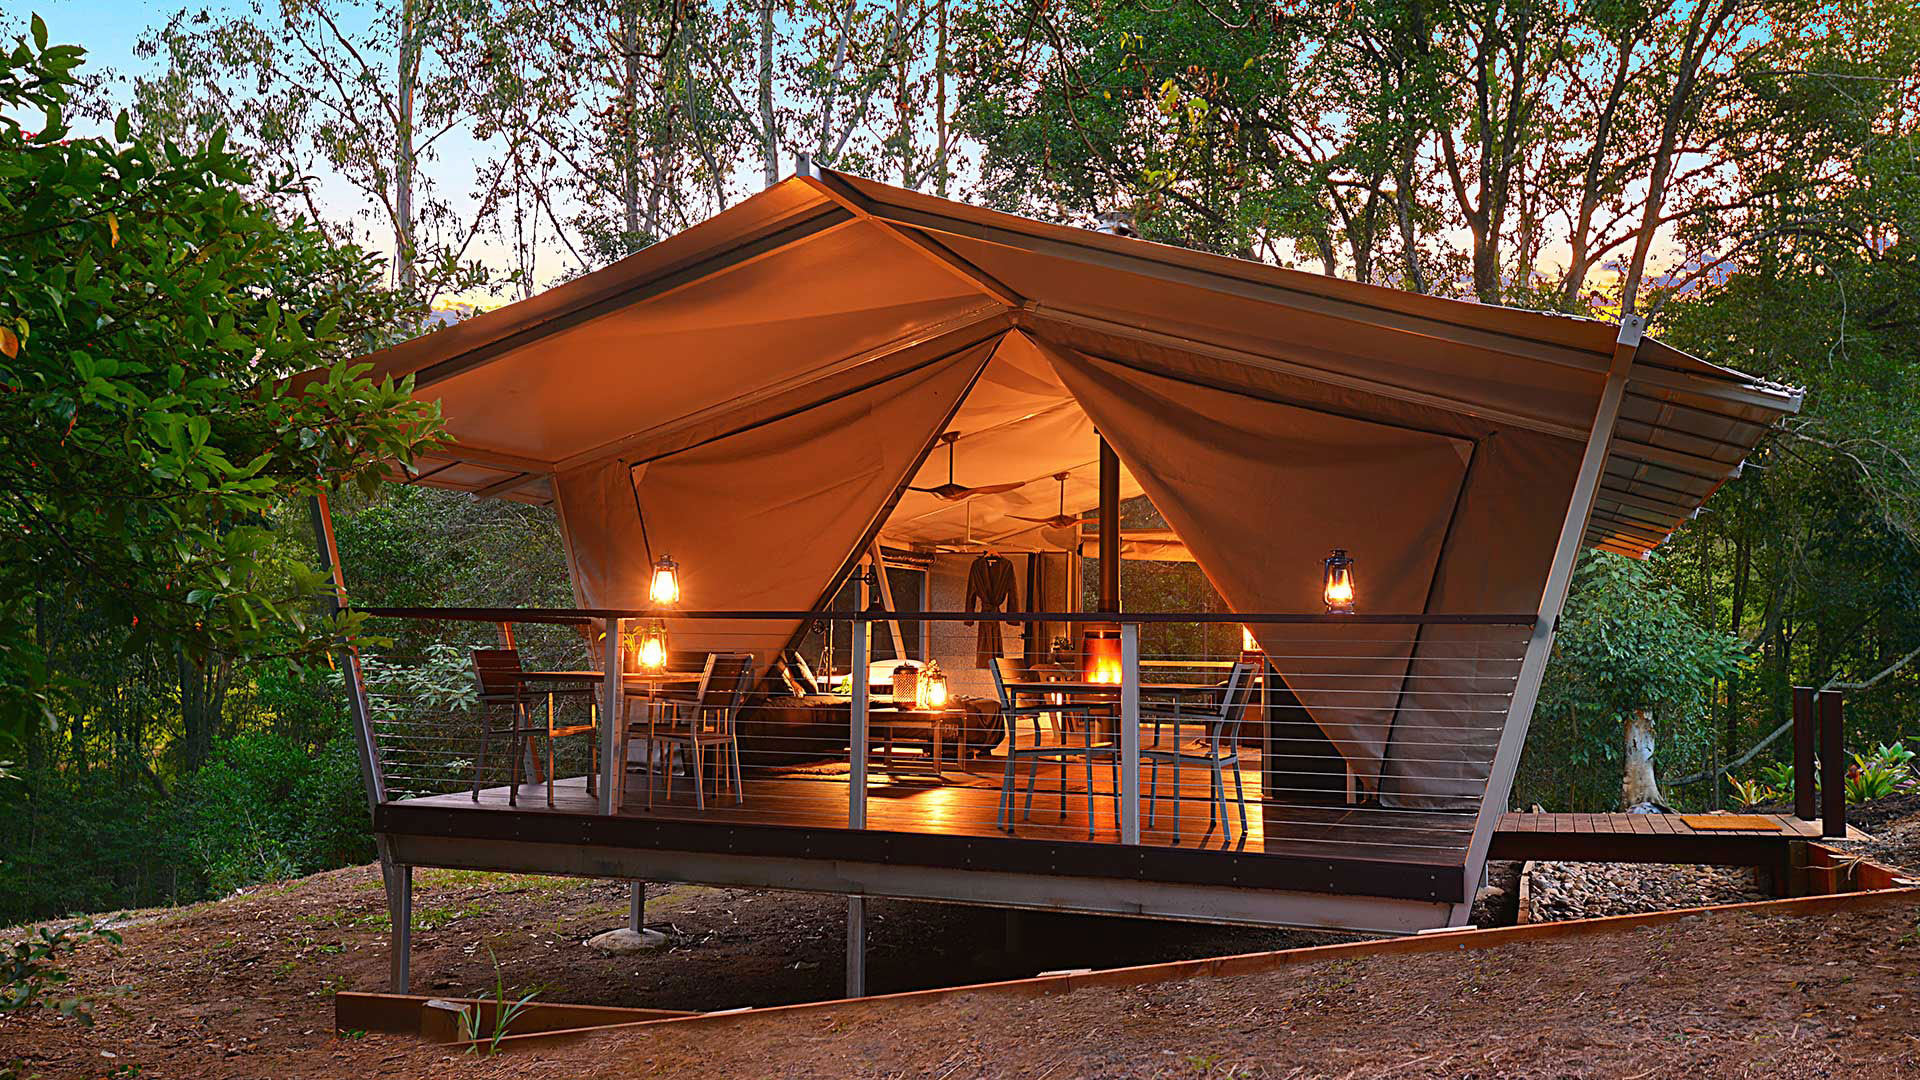 New Starry Nights luxe glamping lights up Sunshine Coast